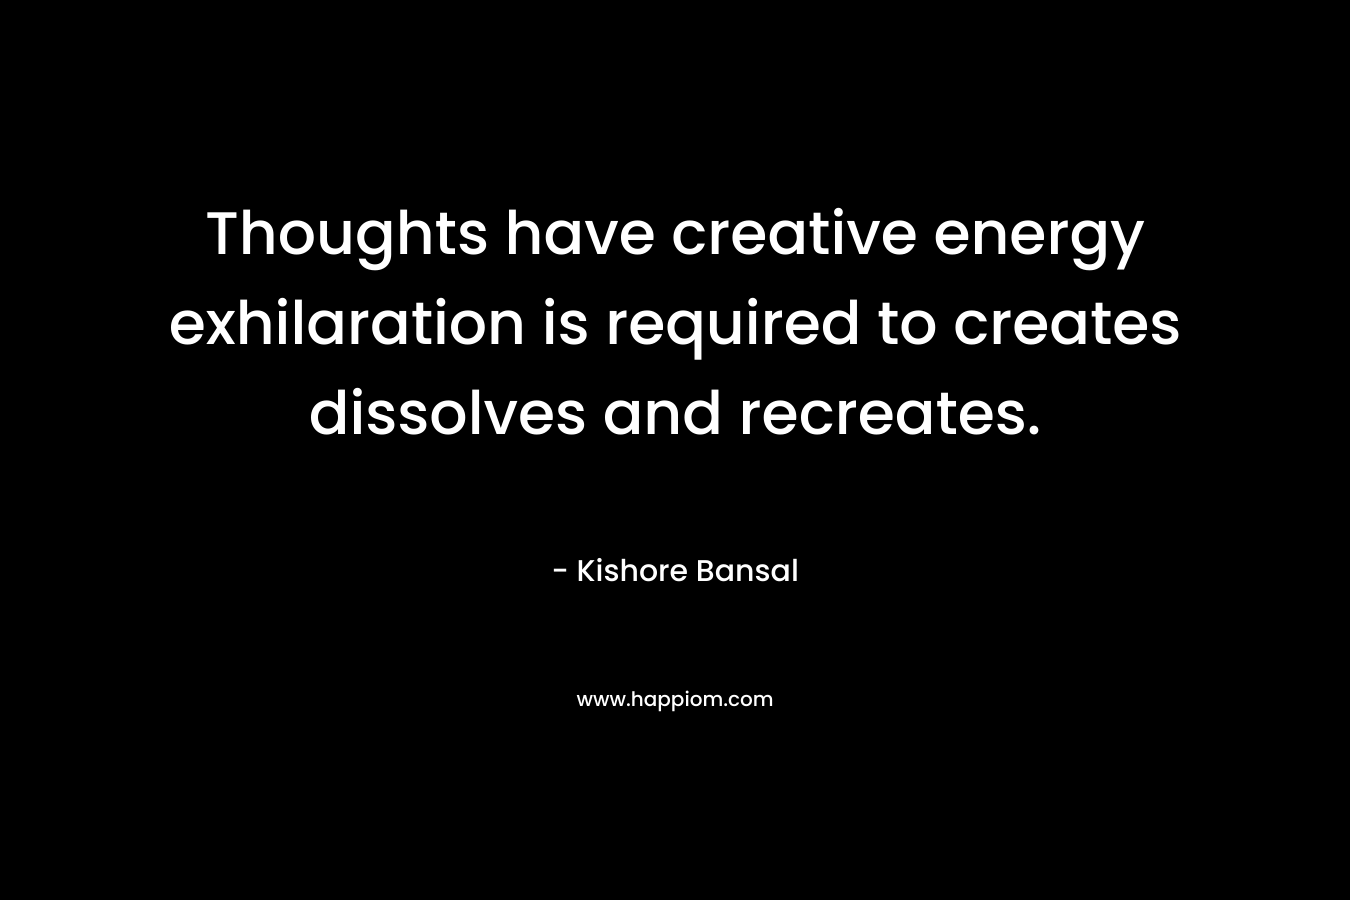 Thoughts have creative energy exhilaration is required to creates dissolves and recreates. – Kishore Bansal